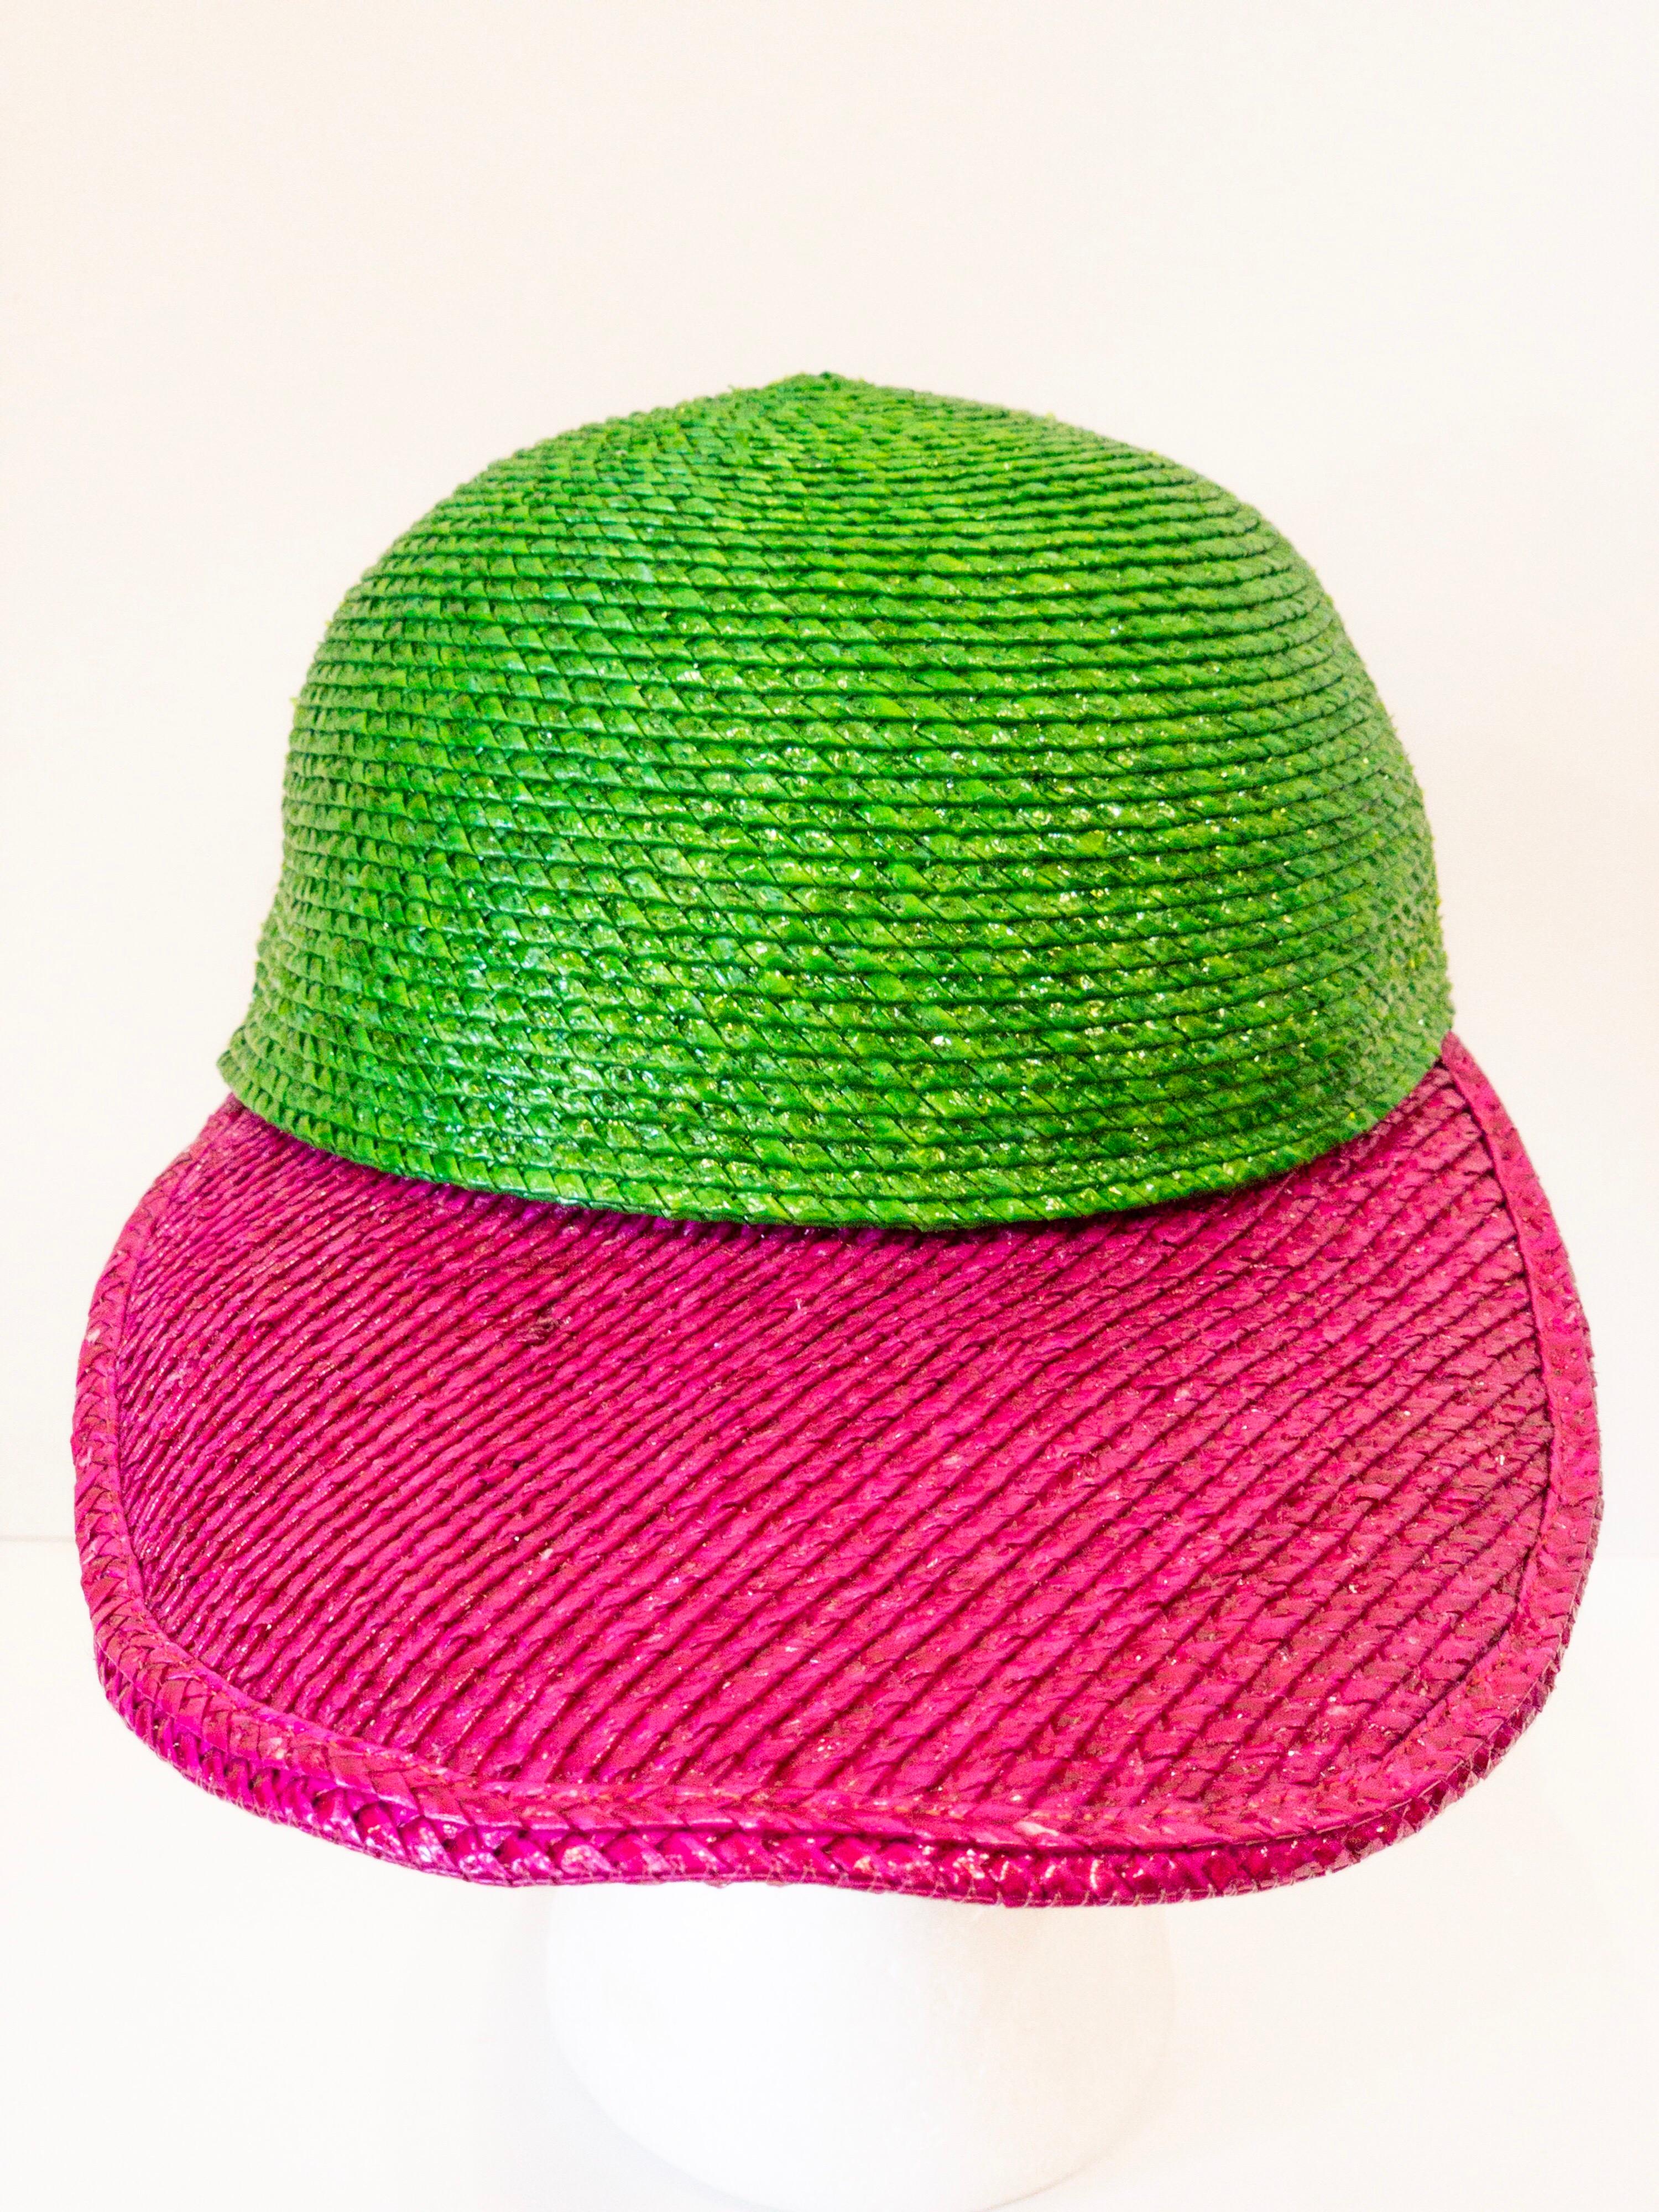 This hat is serving all the 80s vibes! Circa 1980s, this YSL glossy straw hat features a contrasting vibrant green cap and a large deep pink brim. Perfect for the poolside or to spice up your next outfit! 

Measurements
Brim length: 4.5